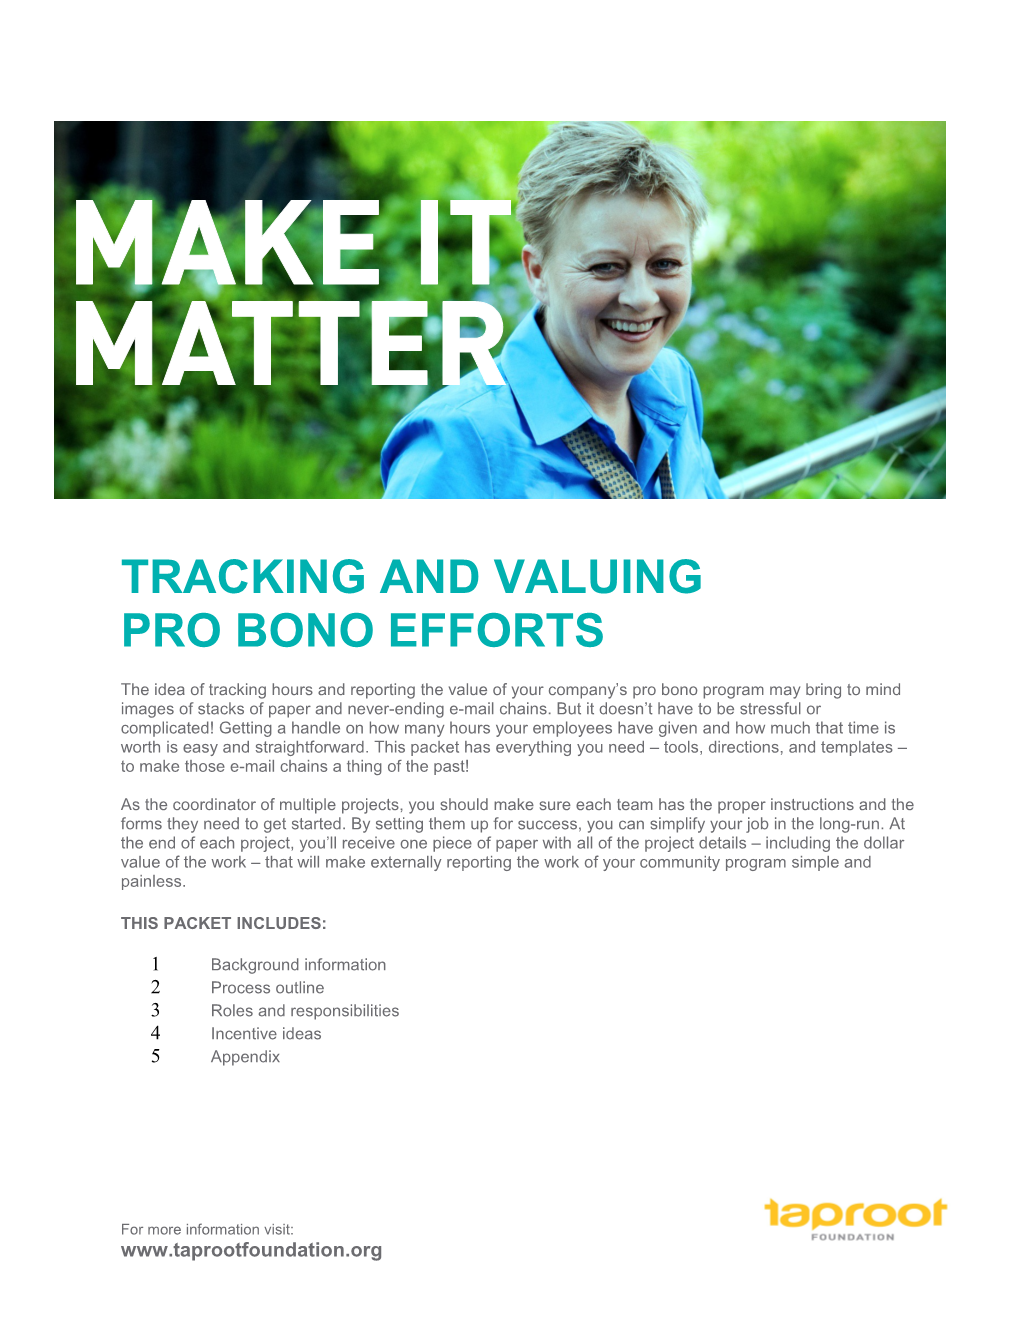 Tracking and Valuing Your Pro Bono Efforts